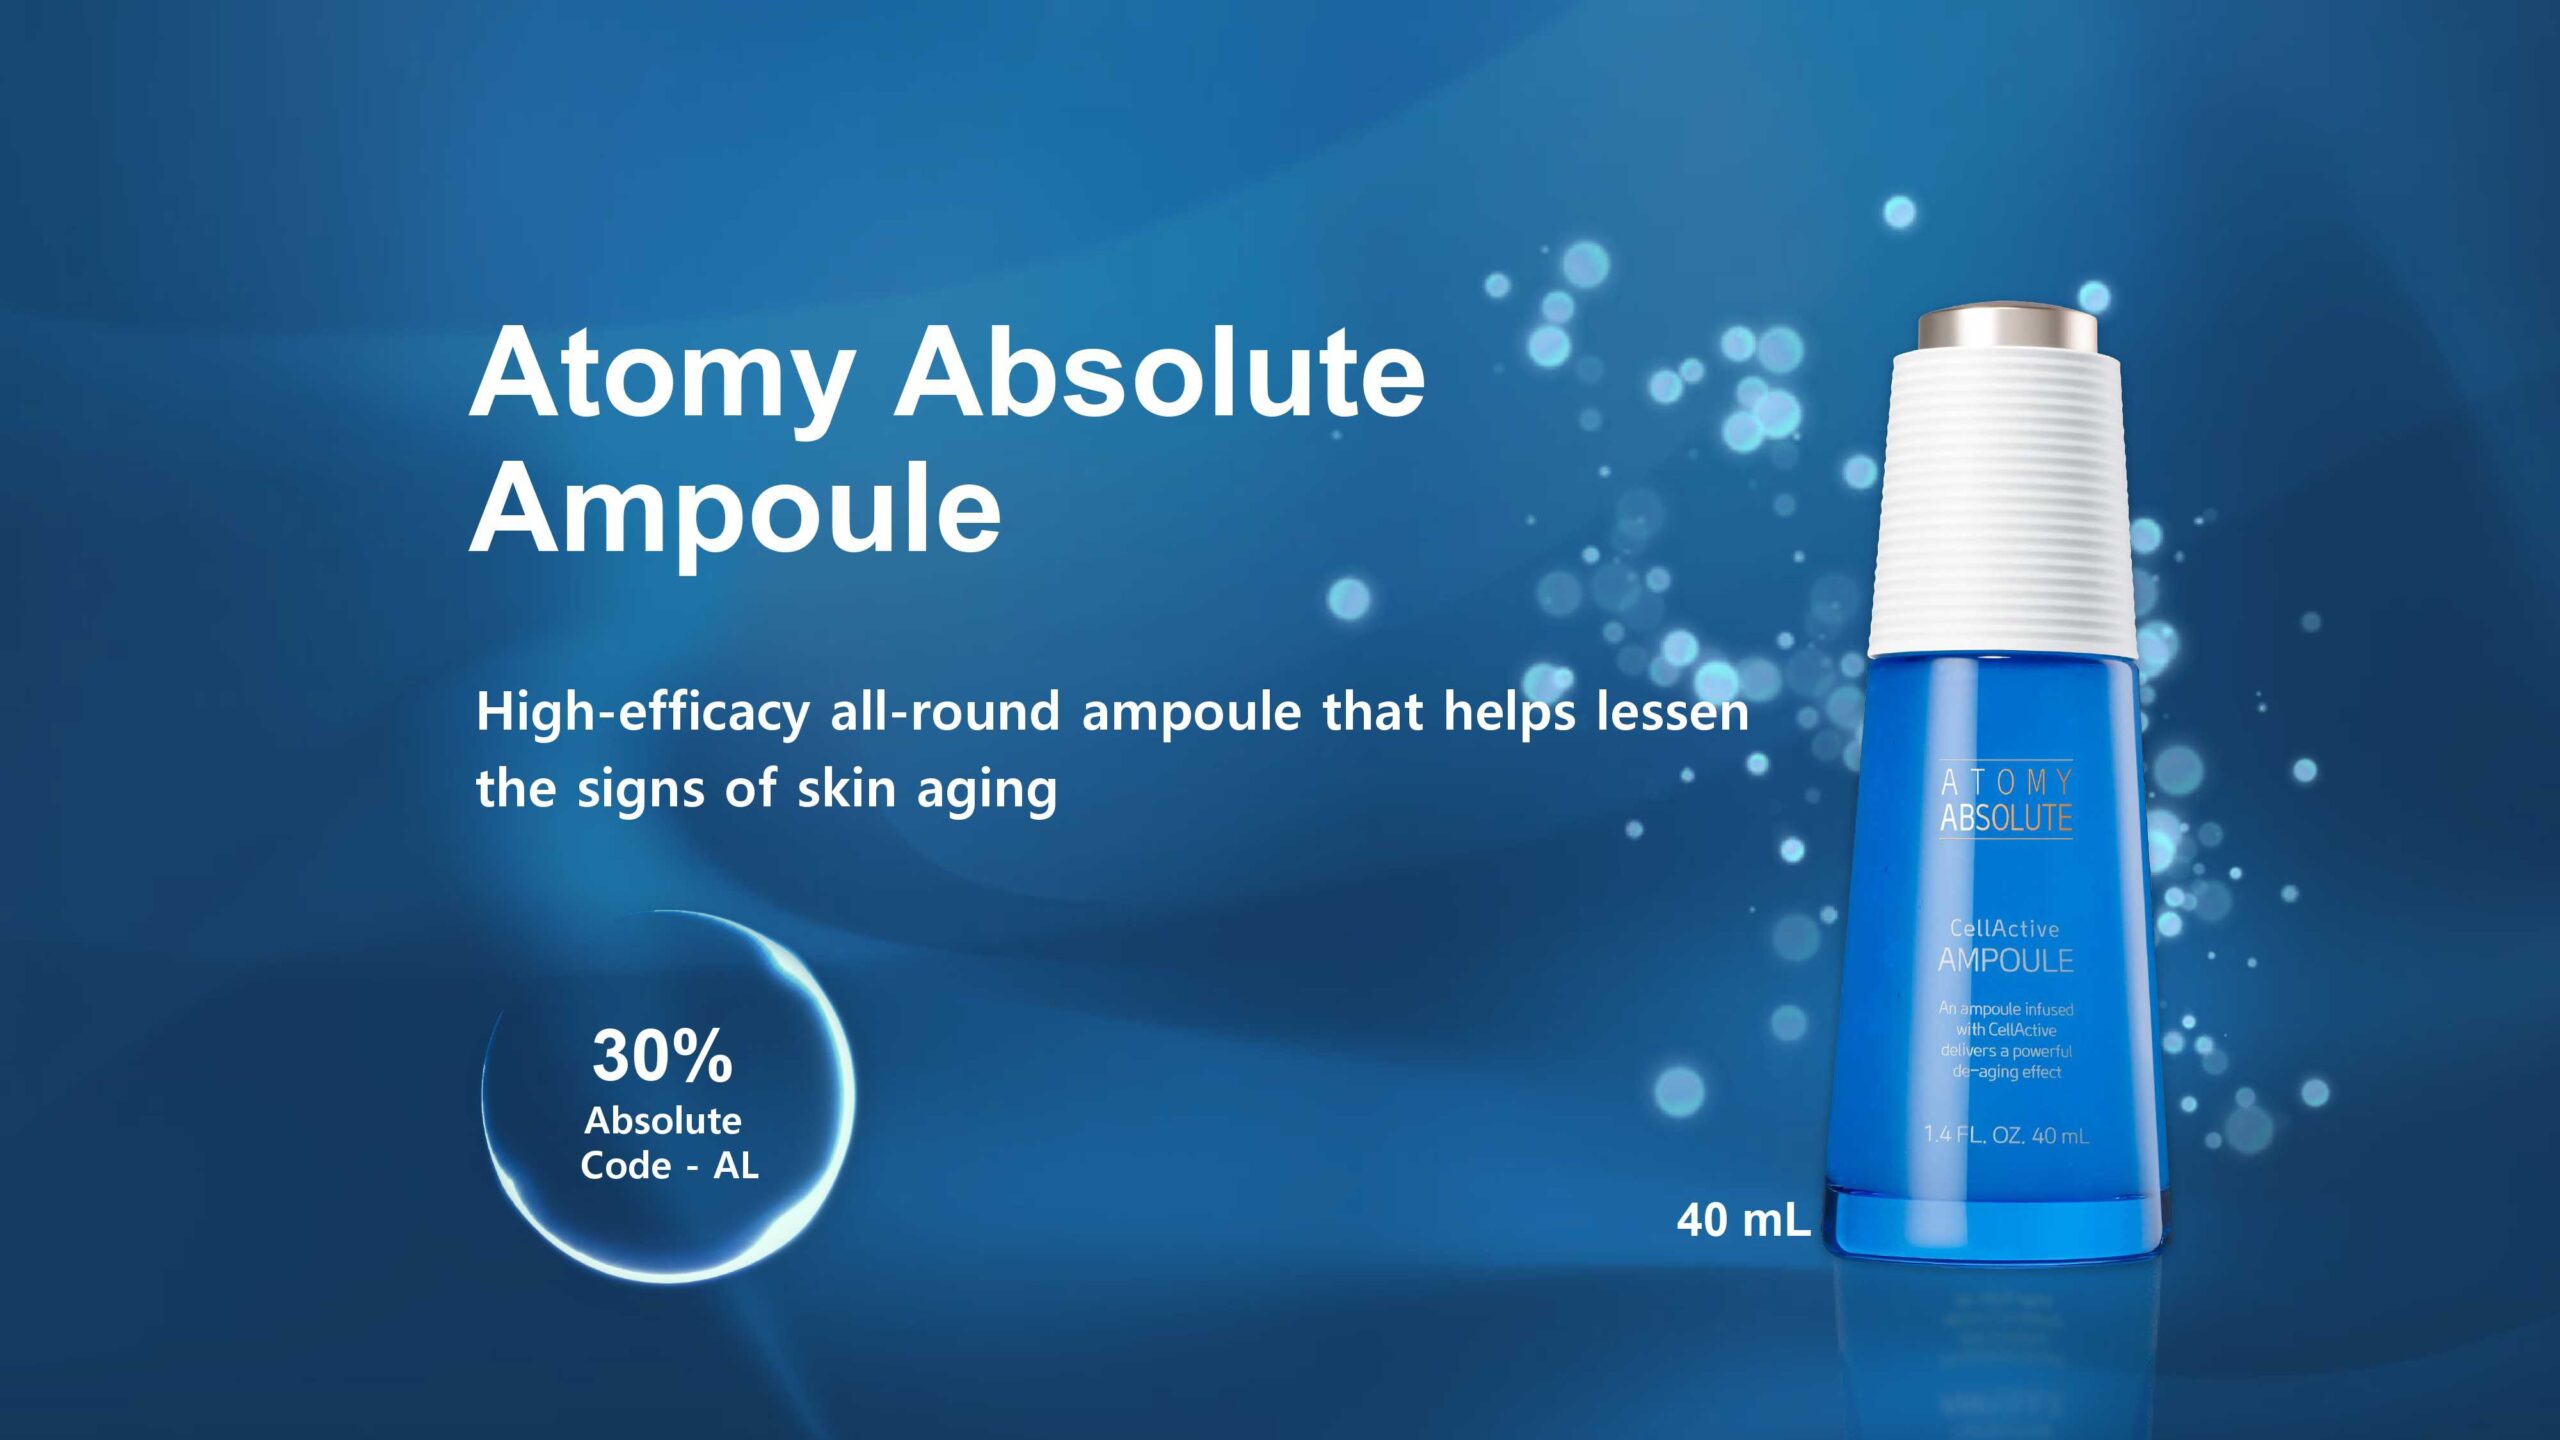 ATOMY Absolute Cell Active Ampoule